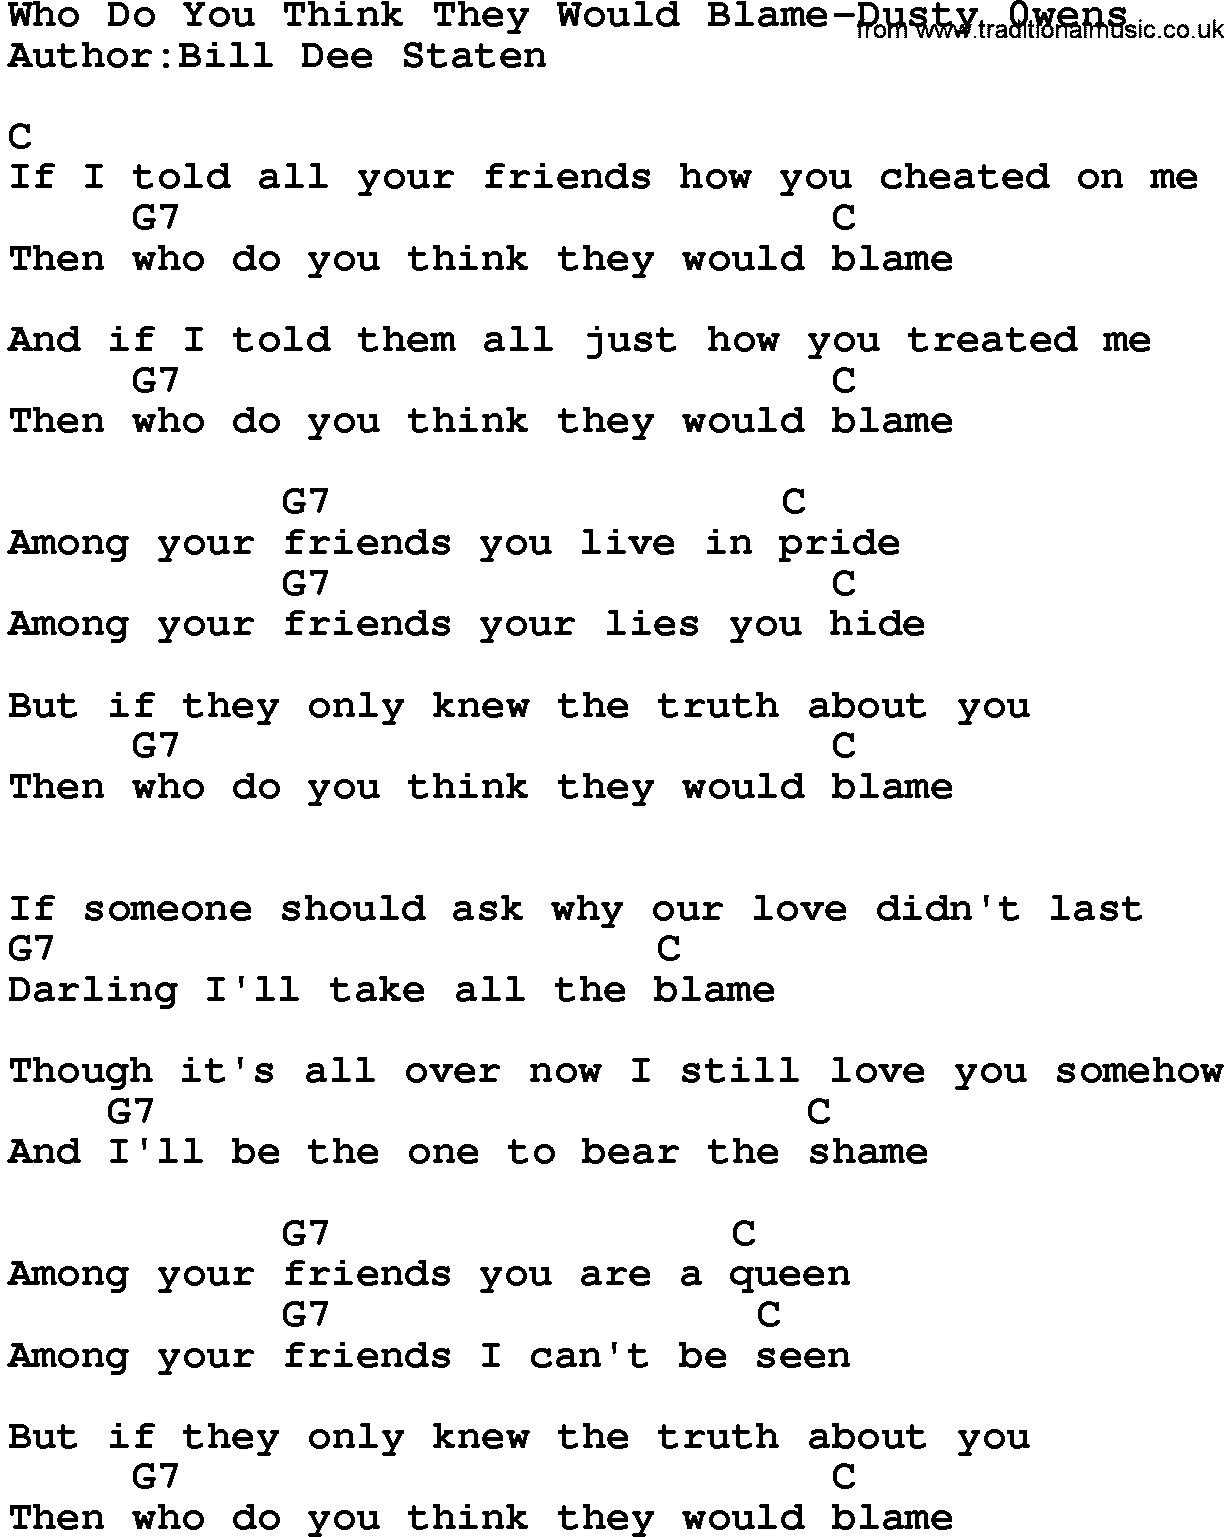 Country music song: Who Do You Think They Would Blame-Dusty 0wens lyrics and chords